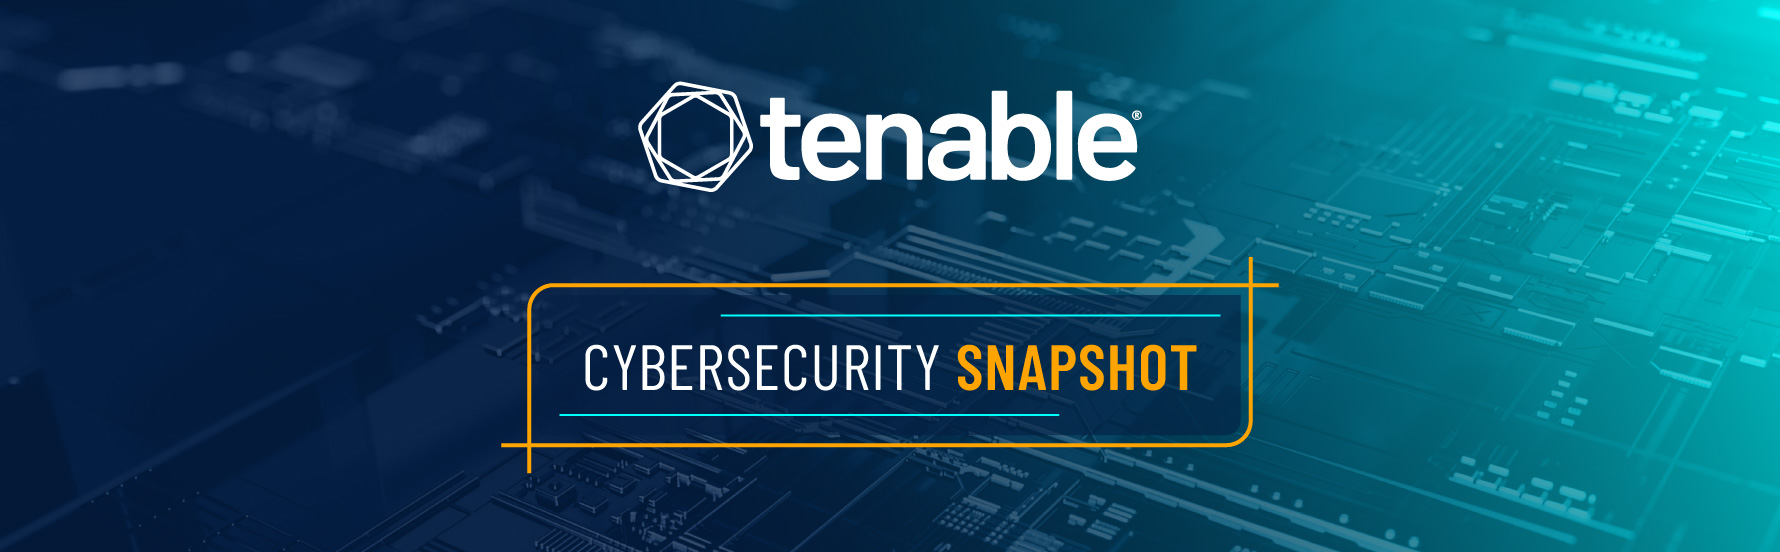 What’s in Store for 2024 in Cyberland? Check Out Tenable Experts’ Predictions for OT Security, AI, Cloud Security, IAM and more